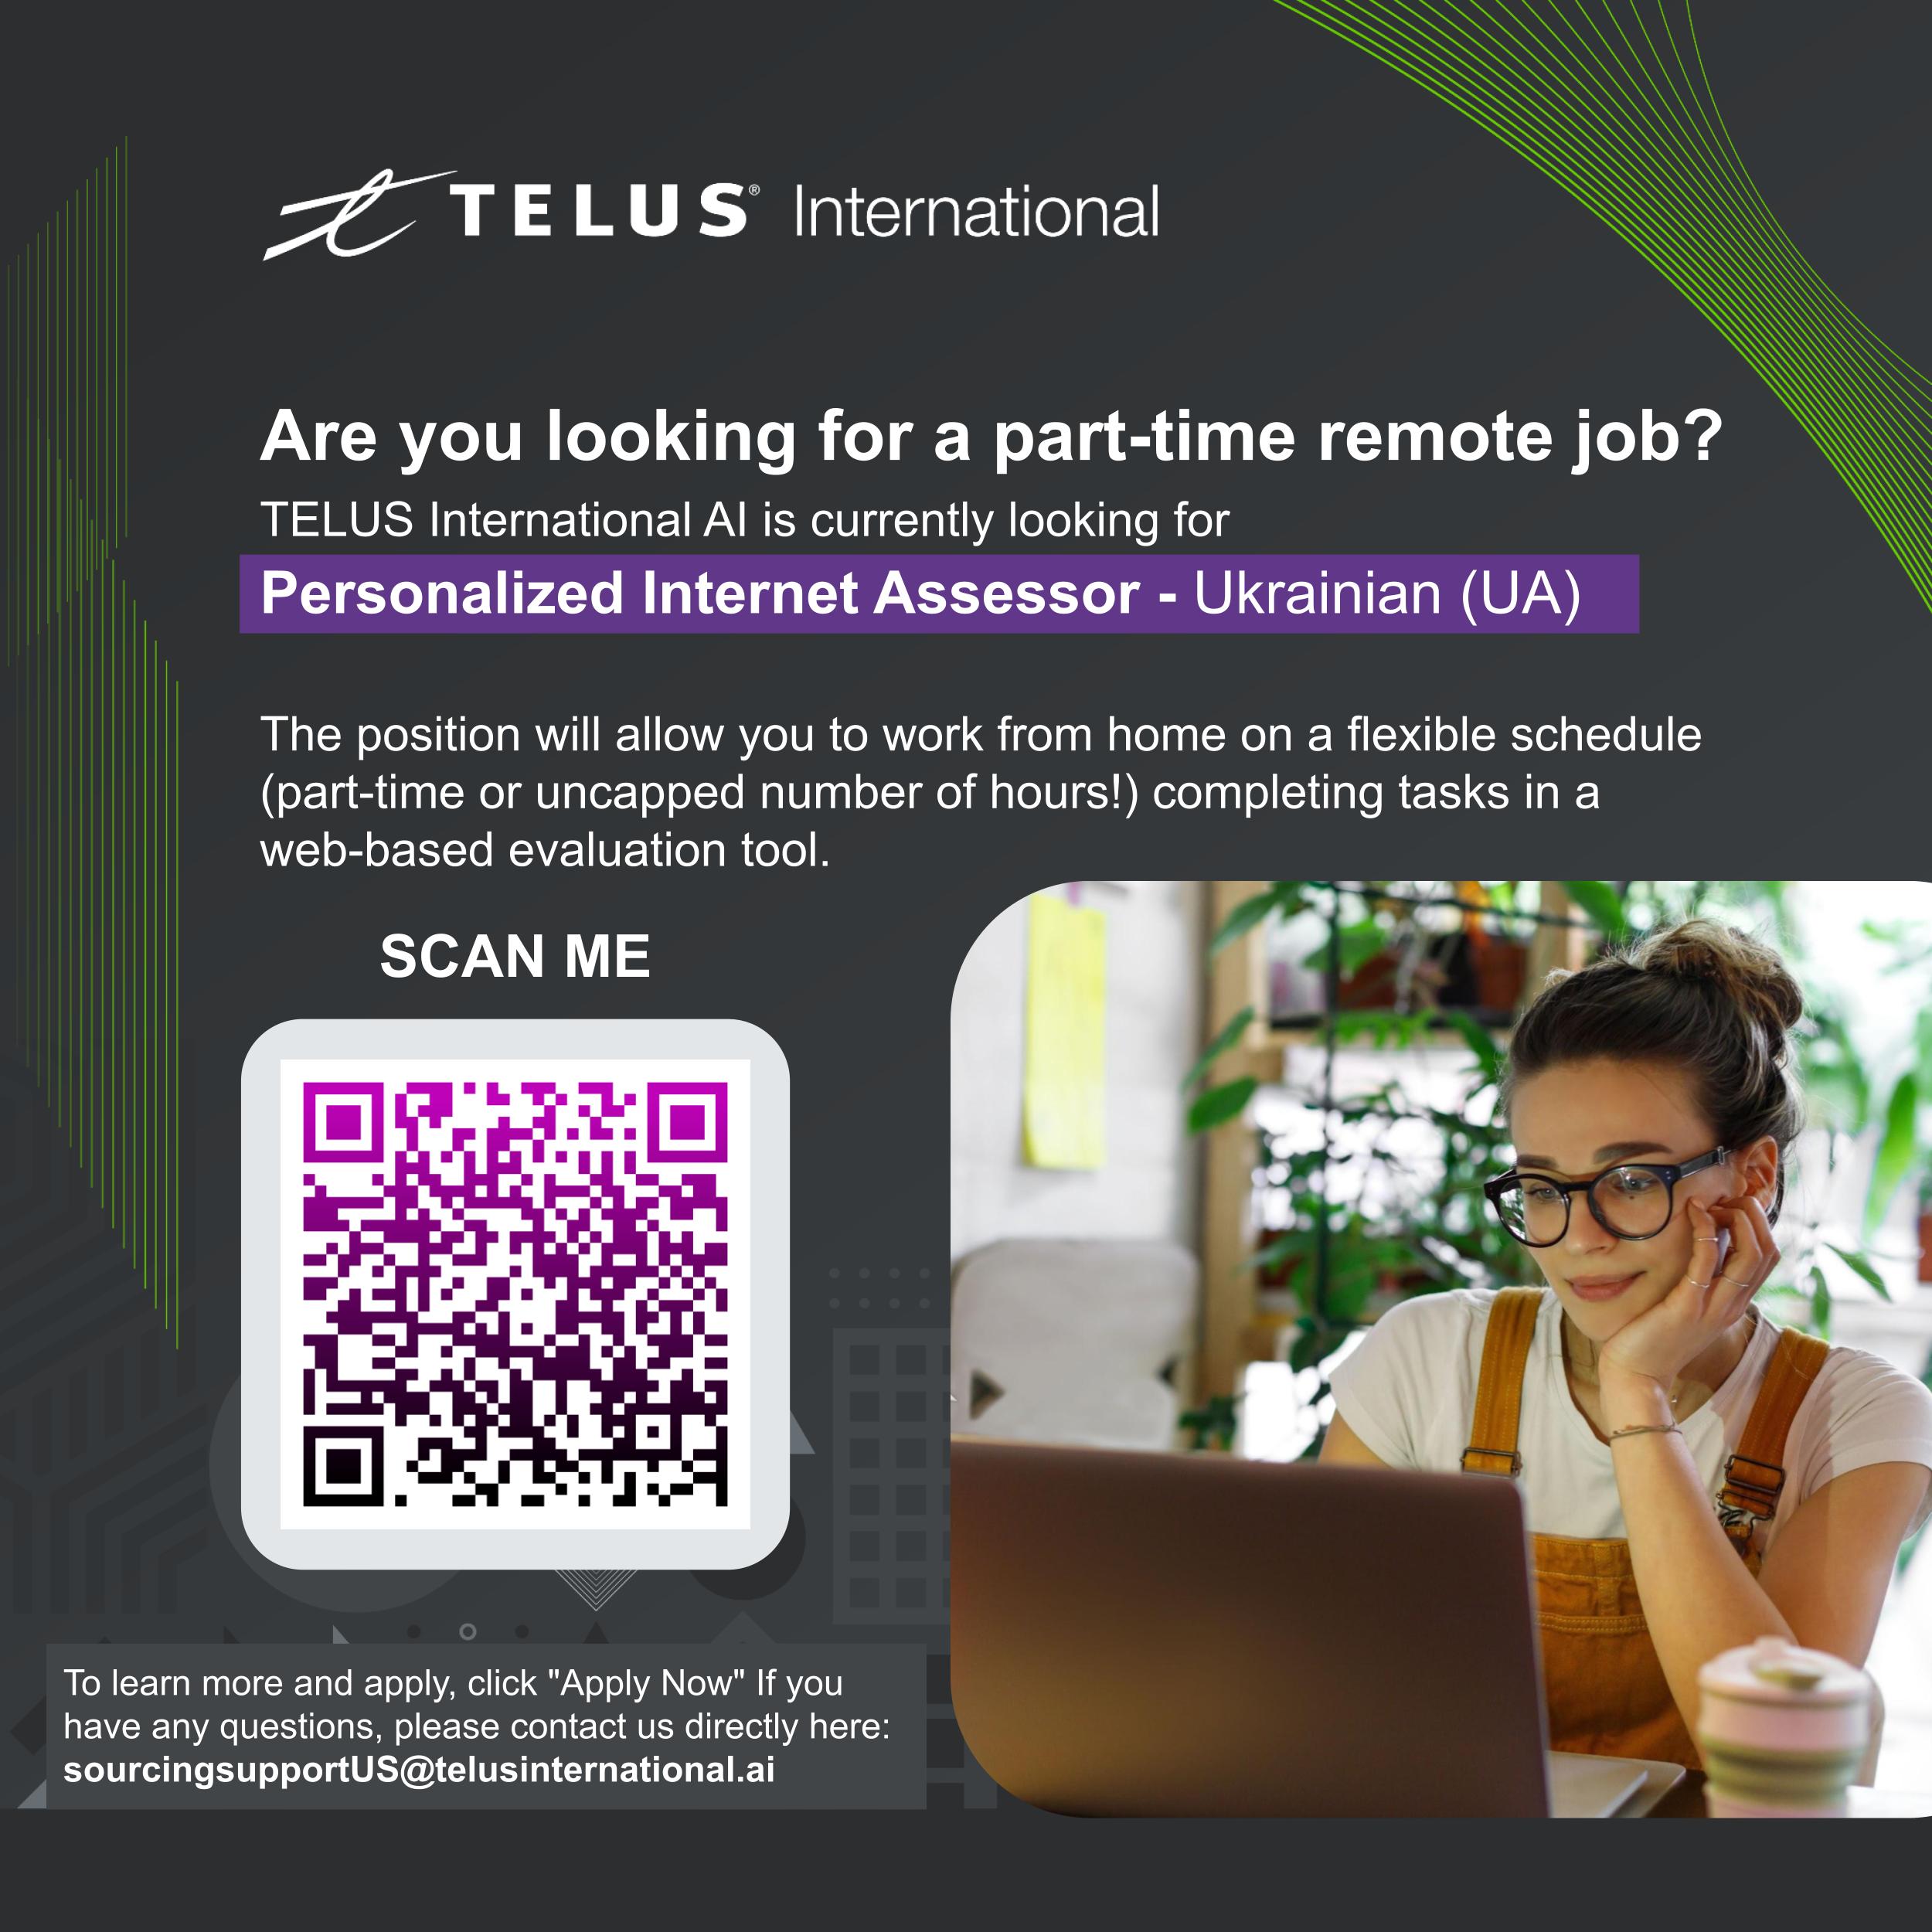 0 i 3 NV ETC ETe late]

  

Are you looking for a part-time remote job?
TELUS International Al is currently looking for
Personalized Internet Assessor - Ukrainian (UA)

The position will allow you to work from home on a flexible schedule
(part-time or uncapped number of hours!) completing tasks in a
web-based evaluation tool.

SCAN ME

 

To learn more and apply, click "Apply Now" If you
have any questions, please contact us directly here:
sourcingsupportUS@telusinternational.ai